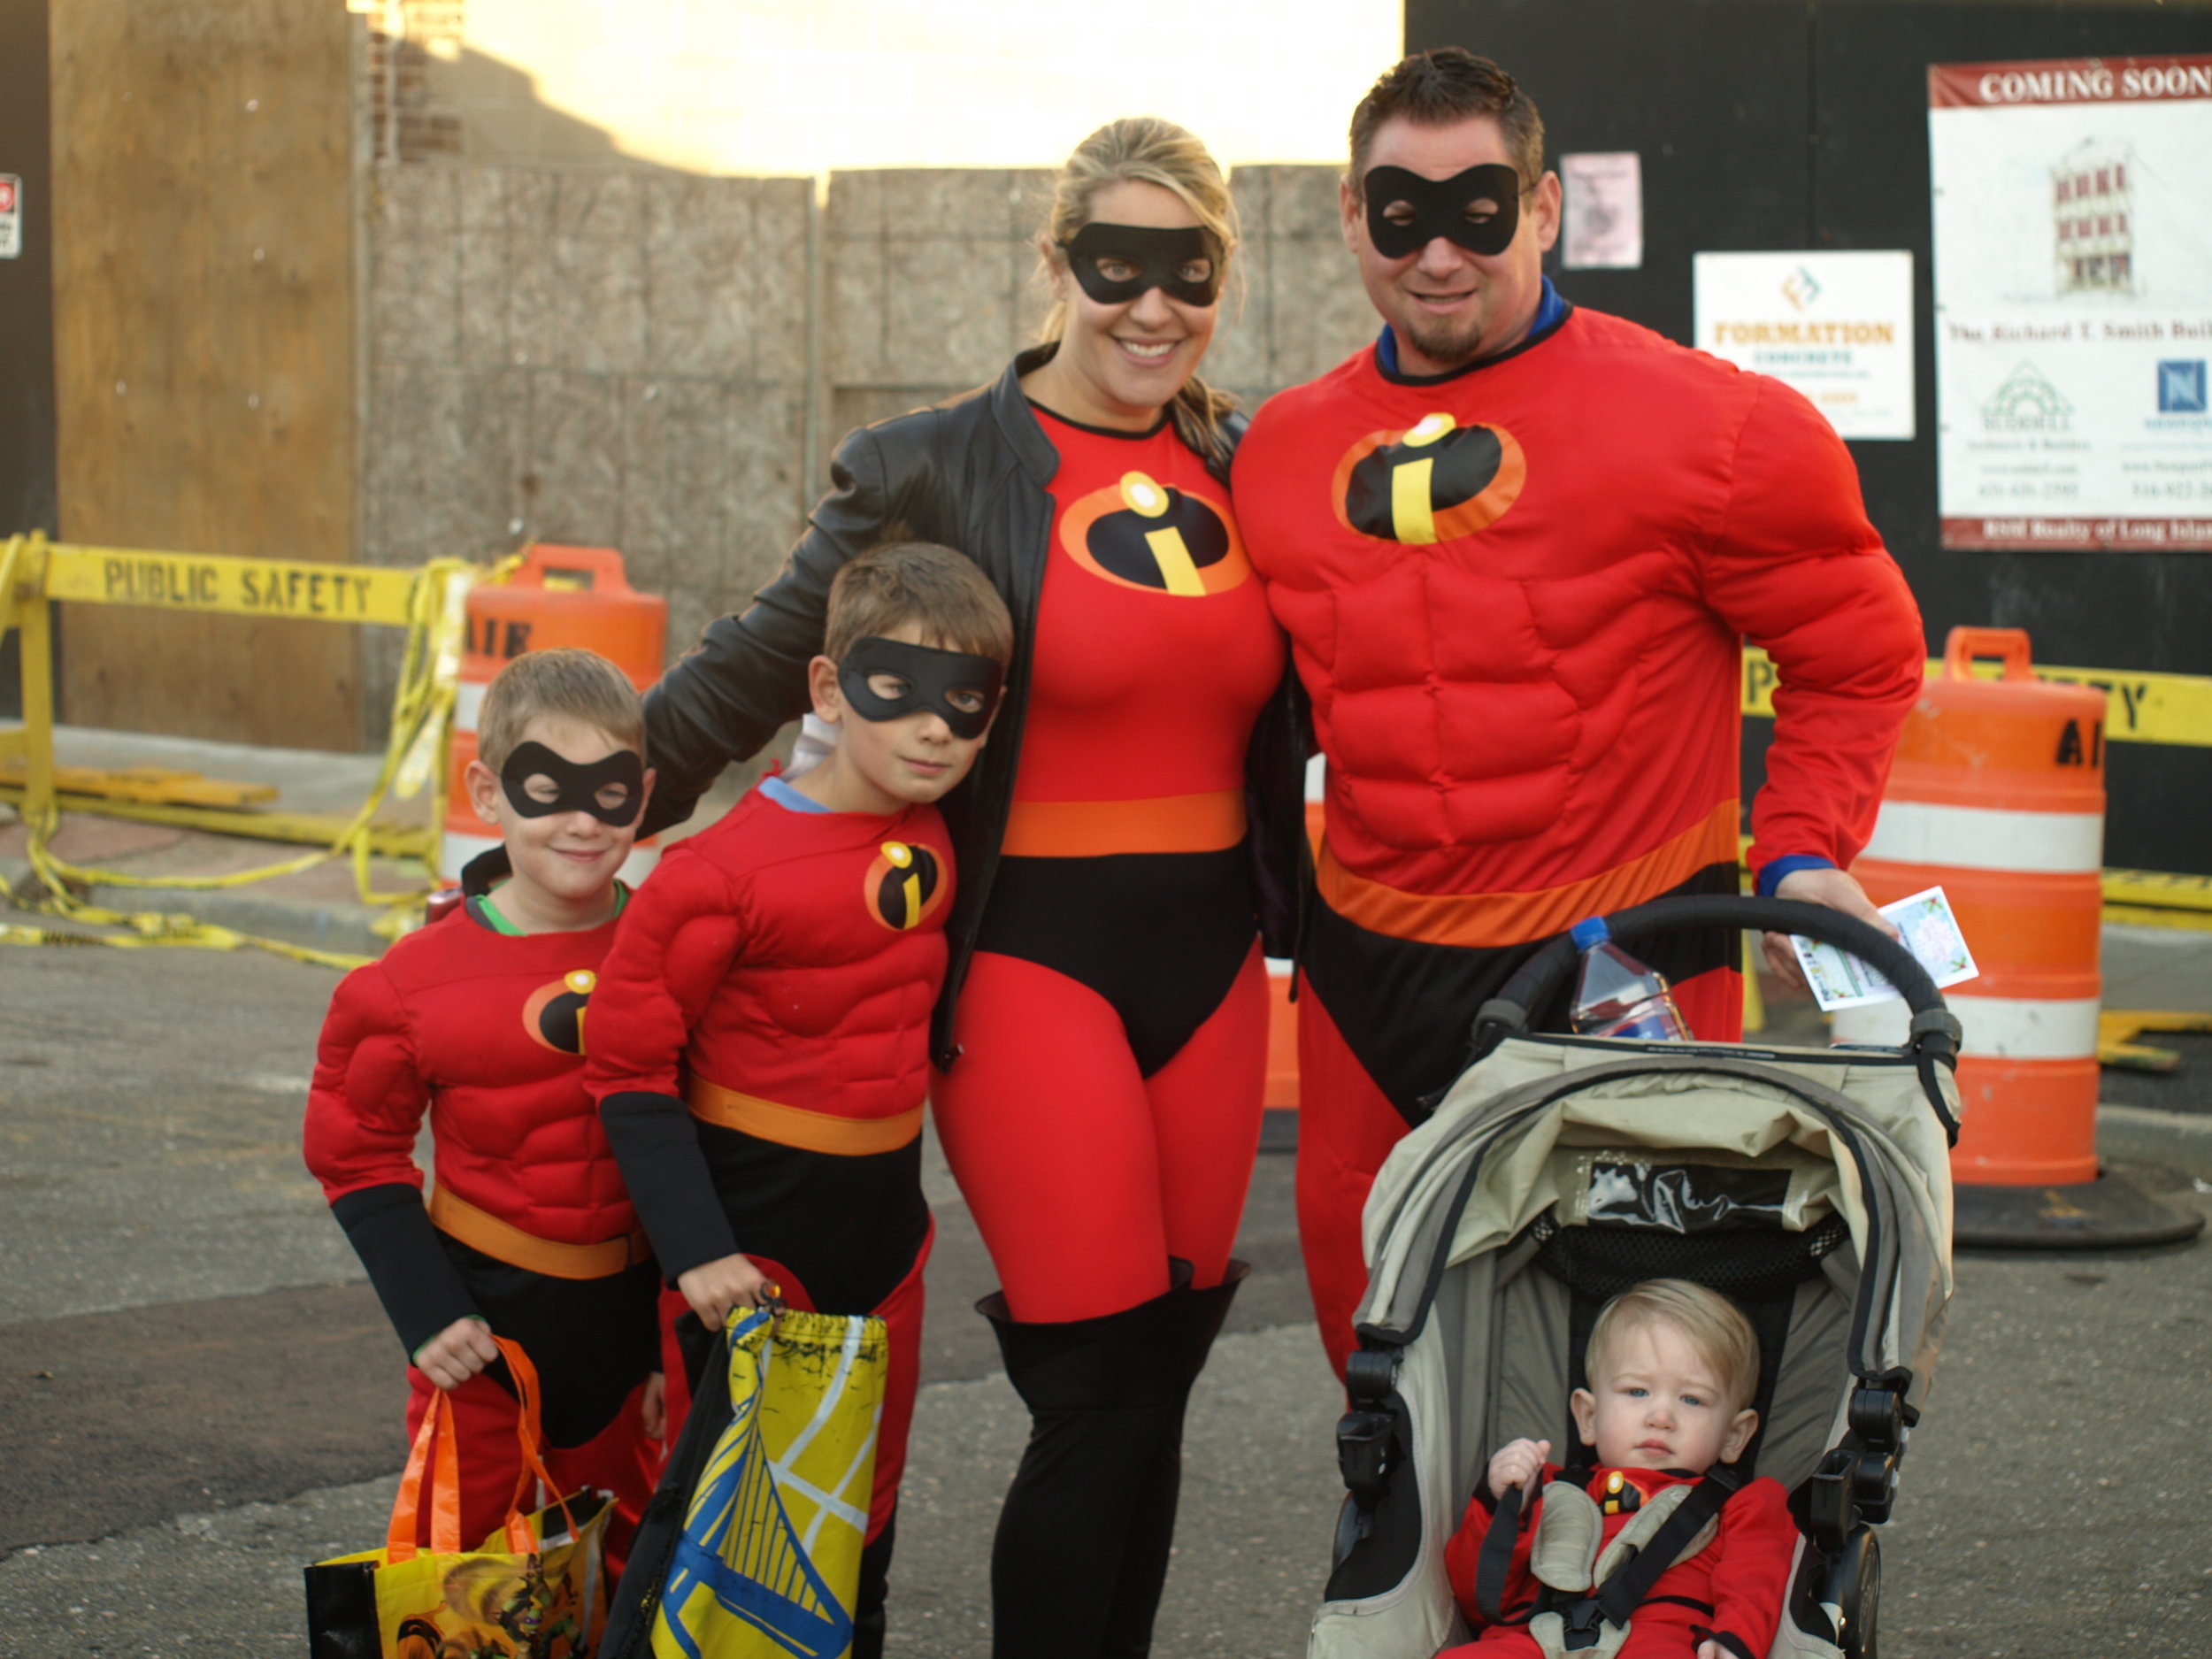   The Incredible family enjoyed dressing up together for at the Annual Children’s Halloween Costume Parade .  Long Islander News Photo/Connor Beach  